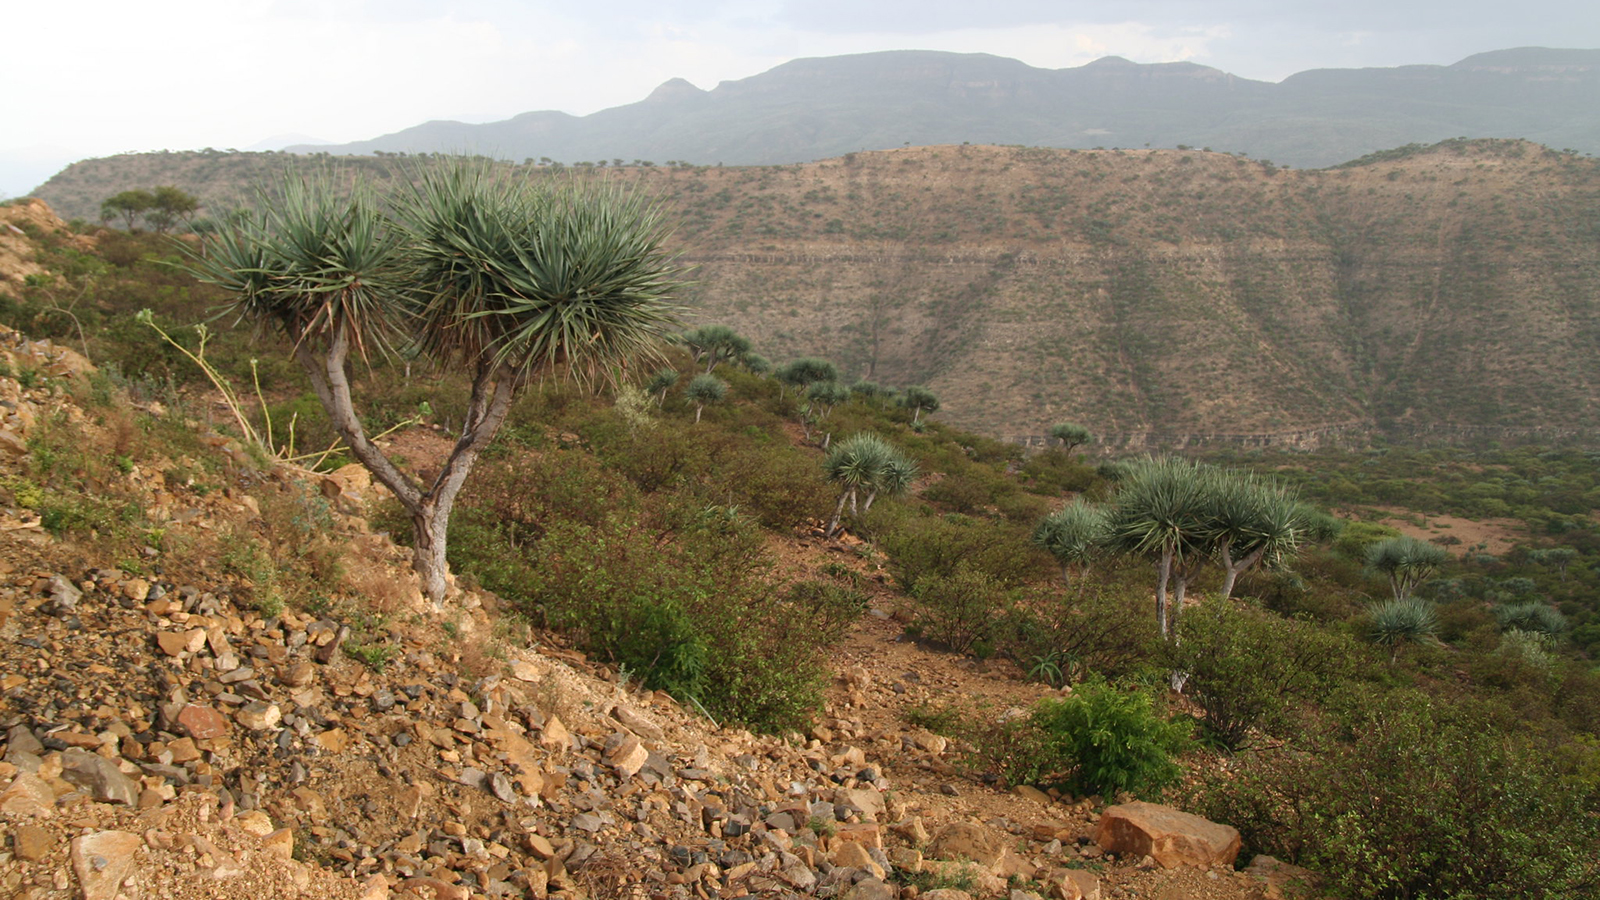 The Nubian dragon tree, Dracaena ombet, is categorized as Endangered on the IUCN Red List. © WeForest